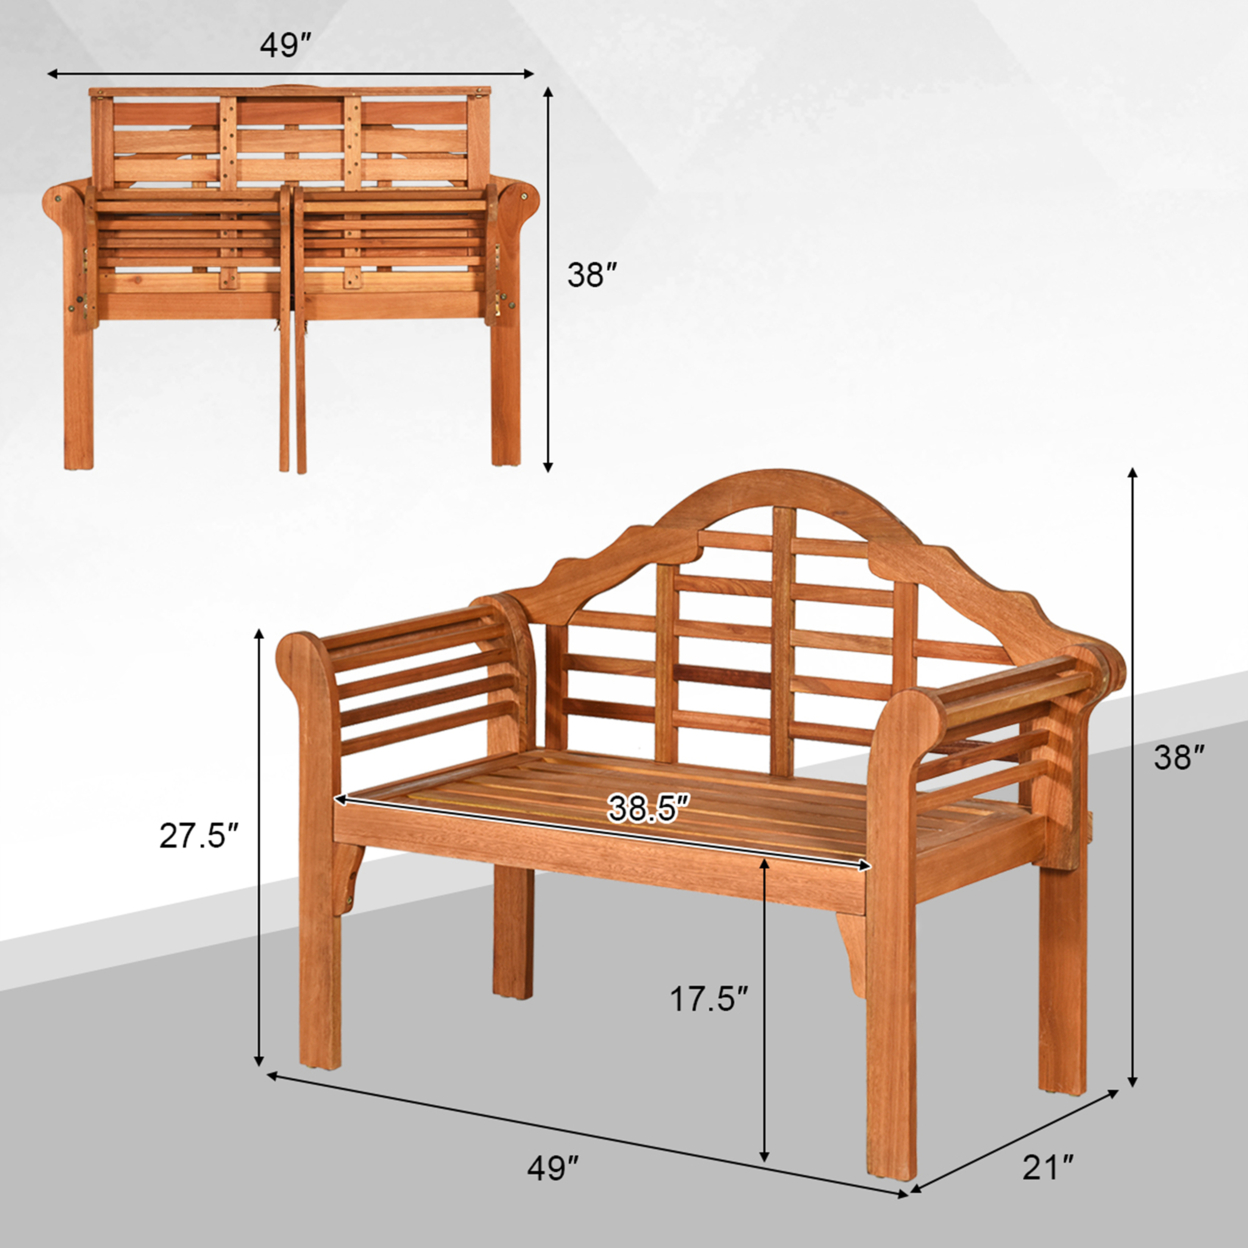 Foldable Patio Wooden Bench Garden Loveseat With Crown-Like Backrest